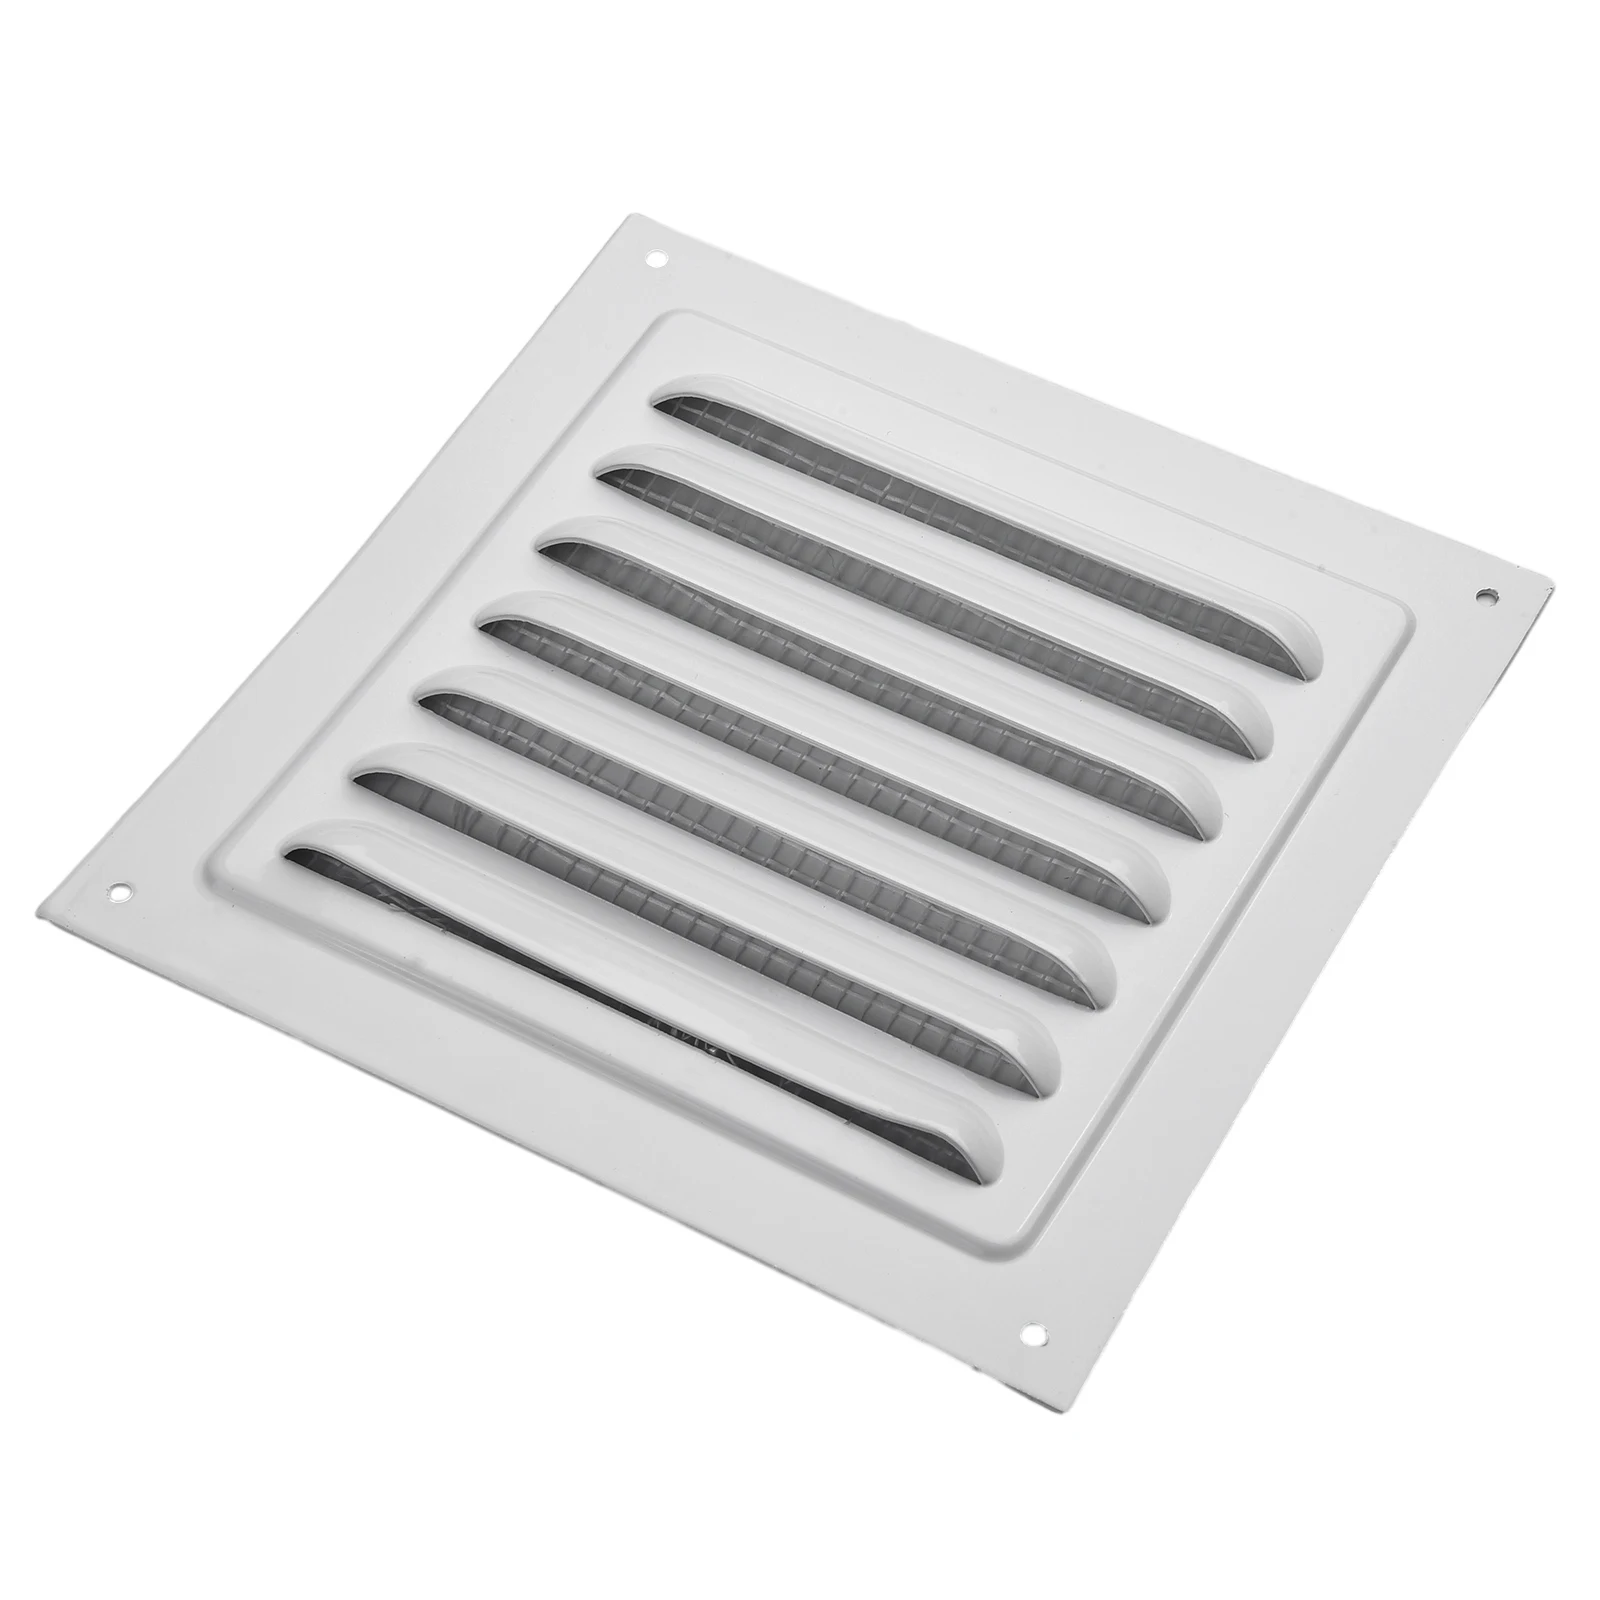 

Aluminum Alloy Louver Air Vent Decoration Cover Grille Cover Square Ventilation Grille Insect Screen Cover Hardware Accessories